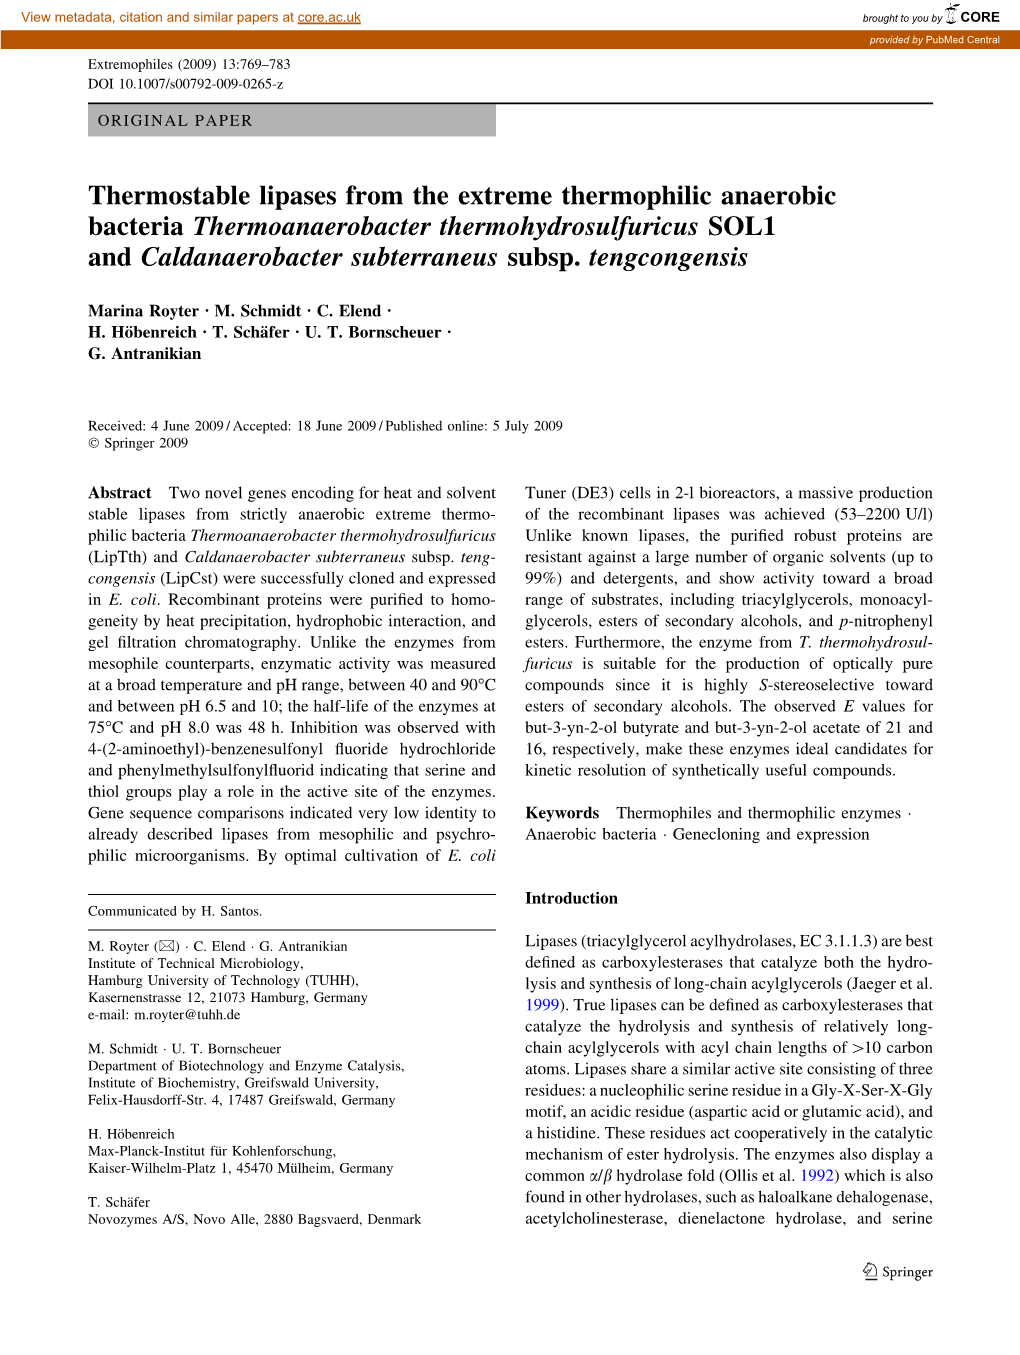 Thermostable Lipases from the Extreme Thermophilic Anaerobic Bacteria Thermoanaerobacter Thermohydrosulfuricus SOL1 and Caldanaerobacter Subterraneus Subsp